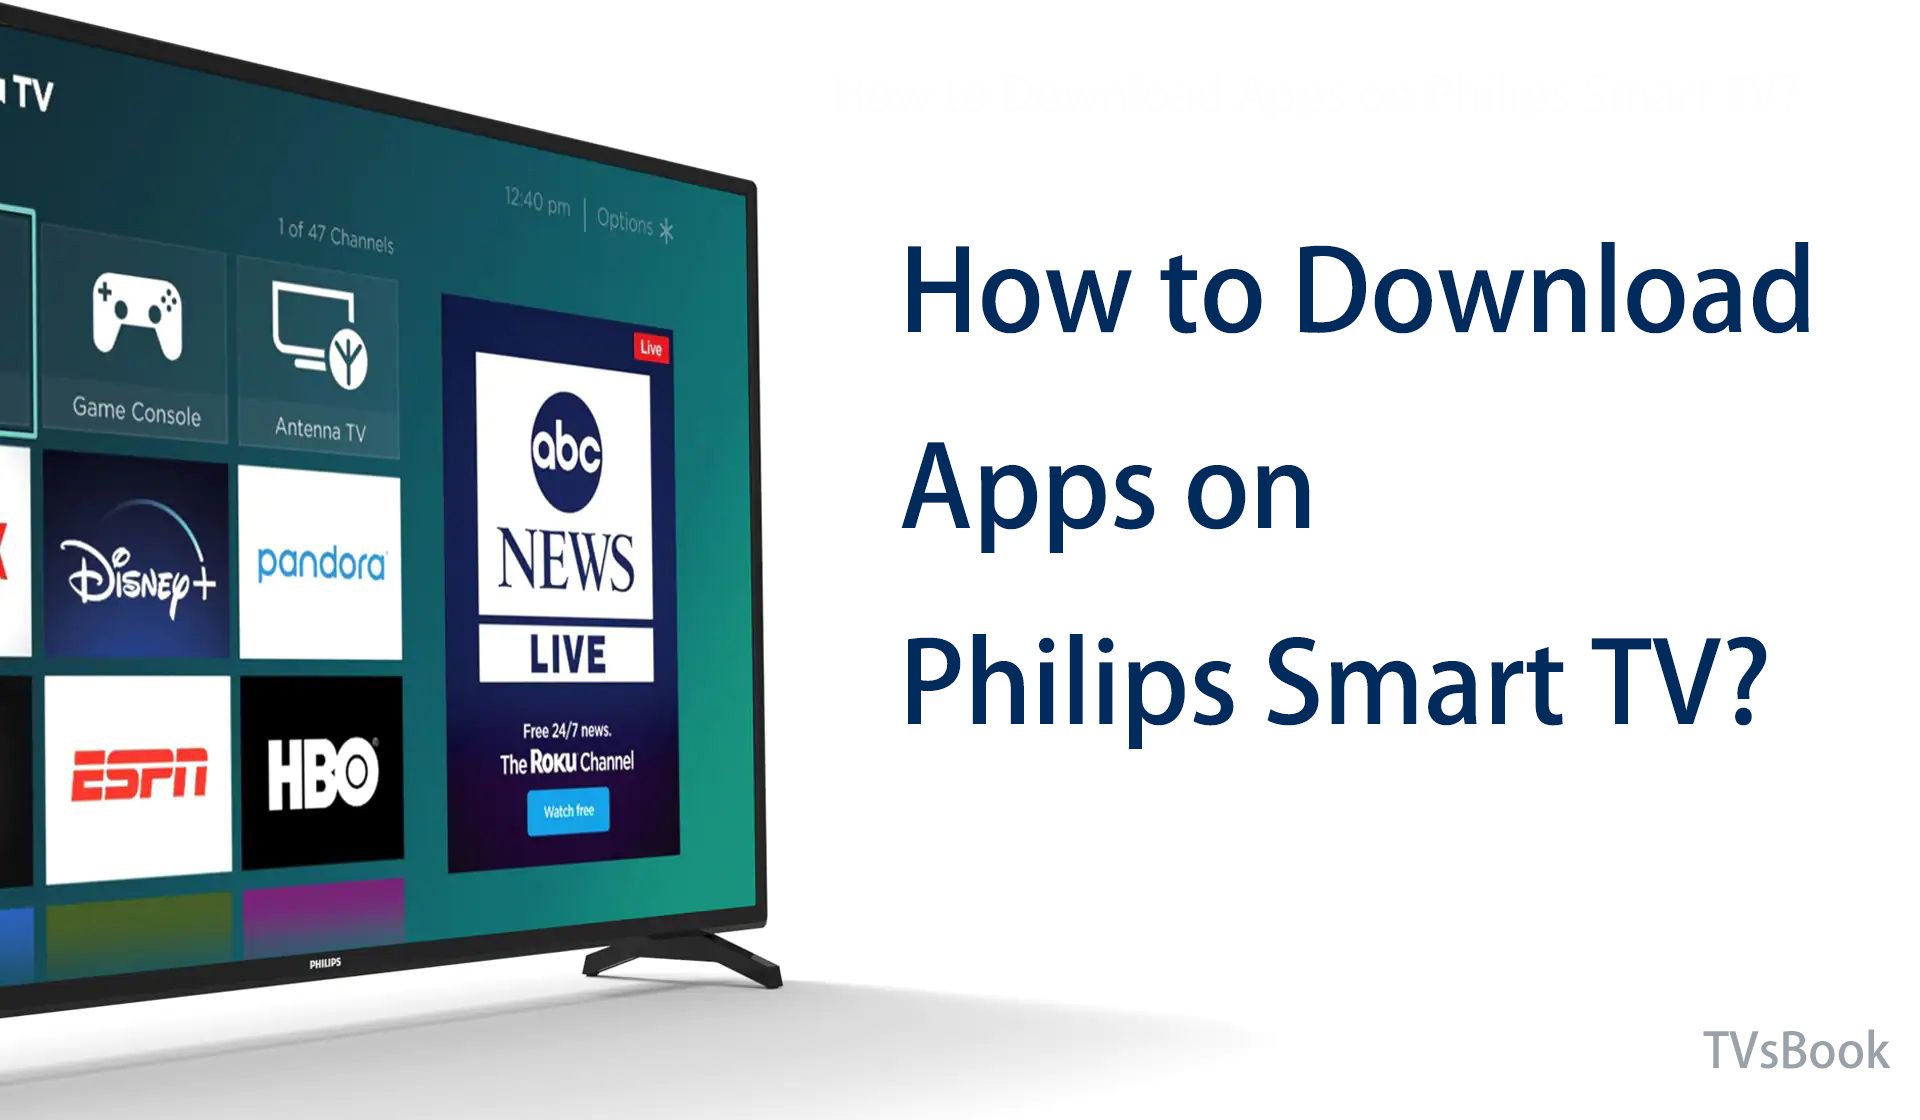 How to Download Apps on Philips Smart TV.jpg